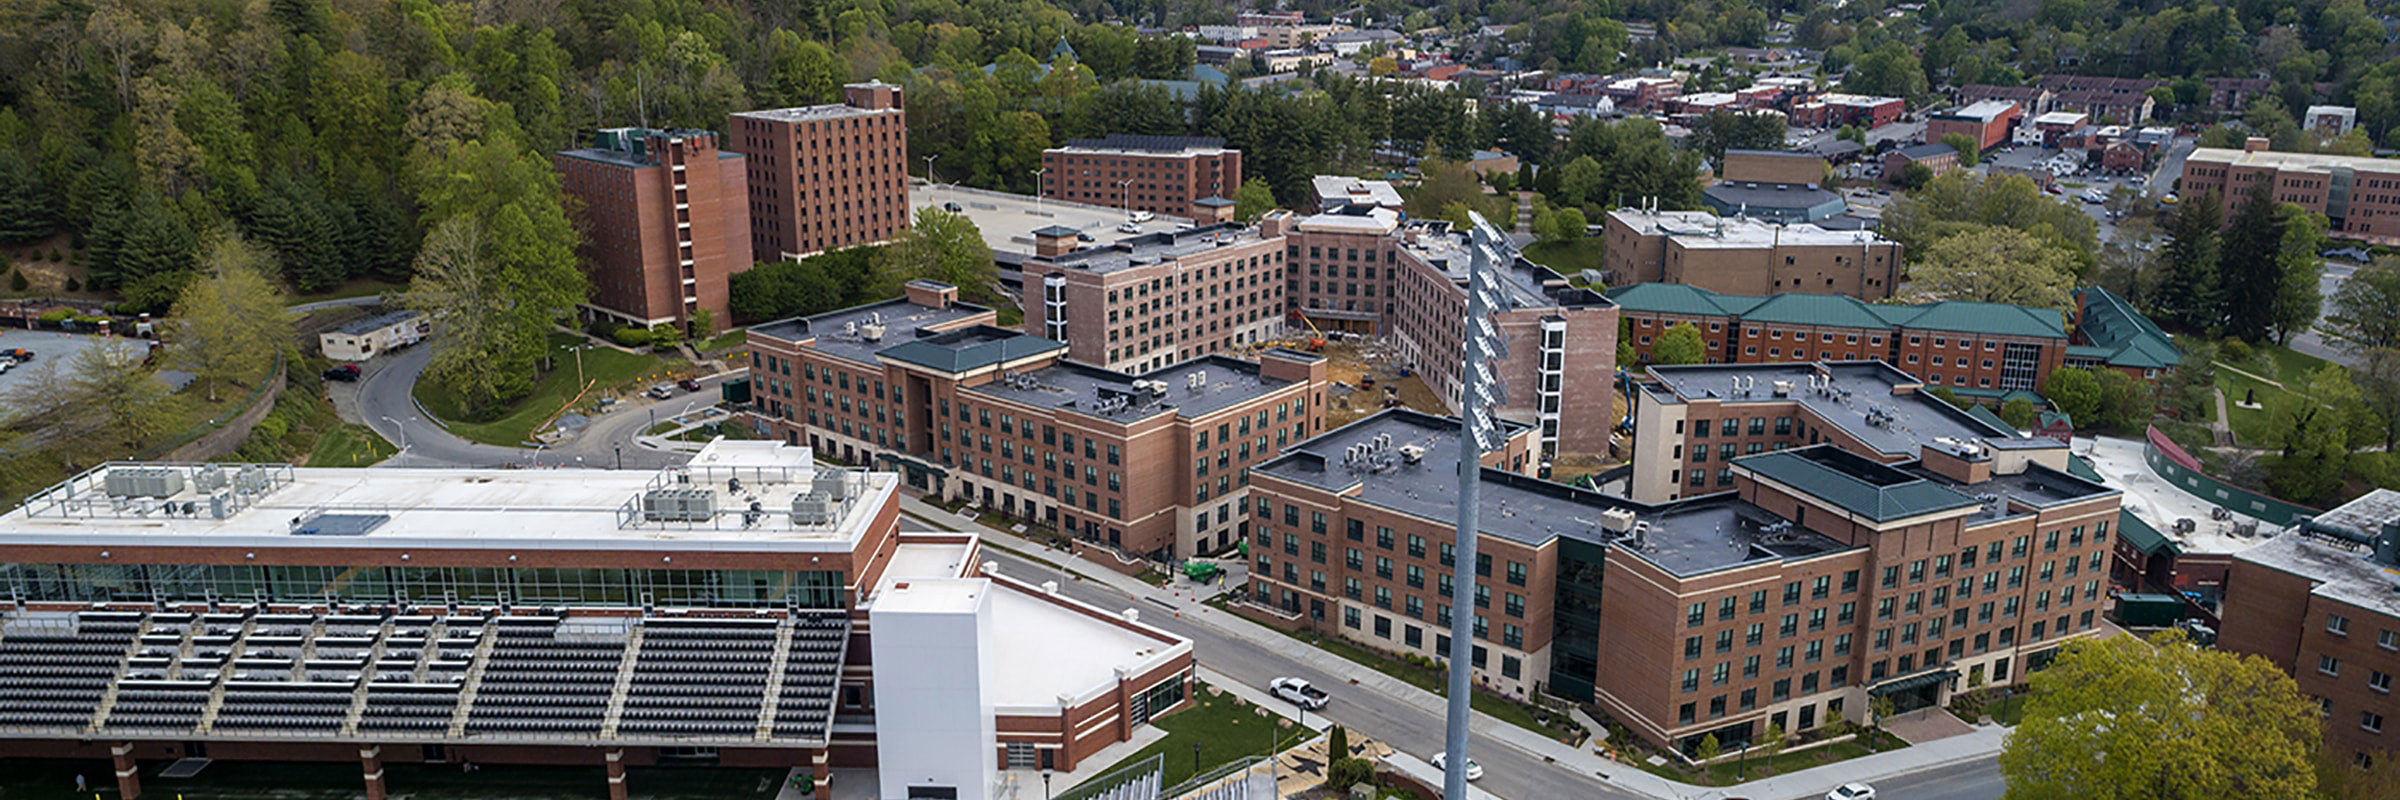 Drone view of residence halls on App State Campus